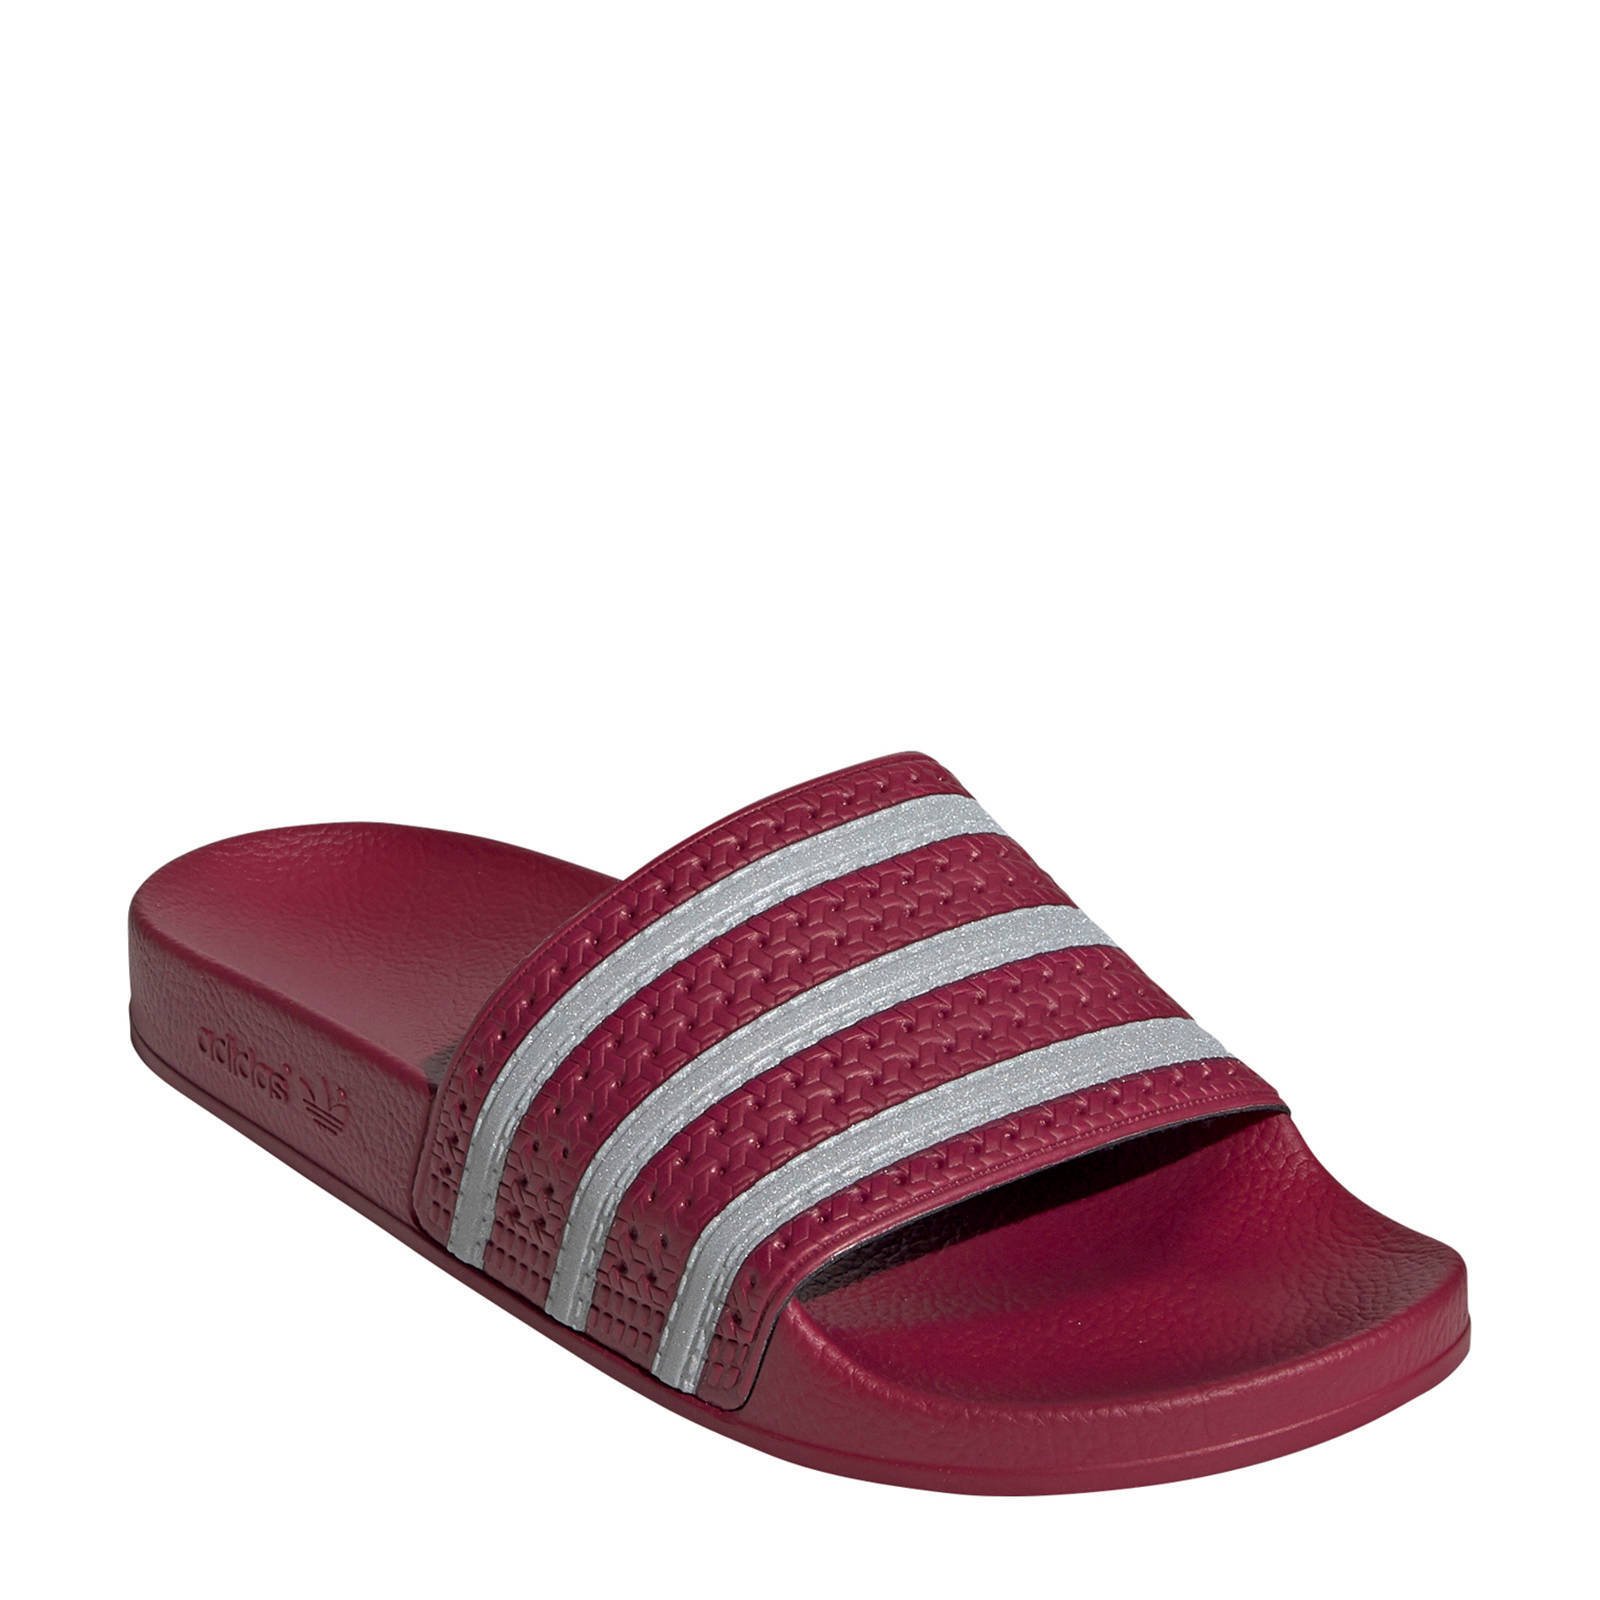 badslippers rood, OFF 74%,Cheap price !